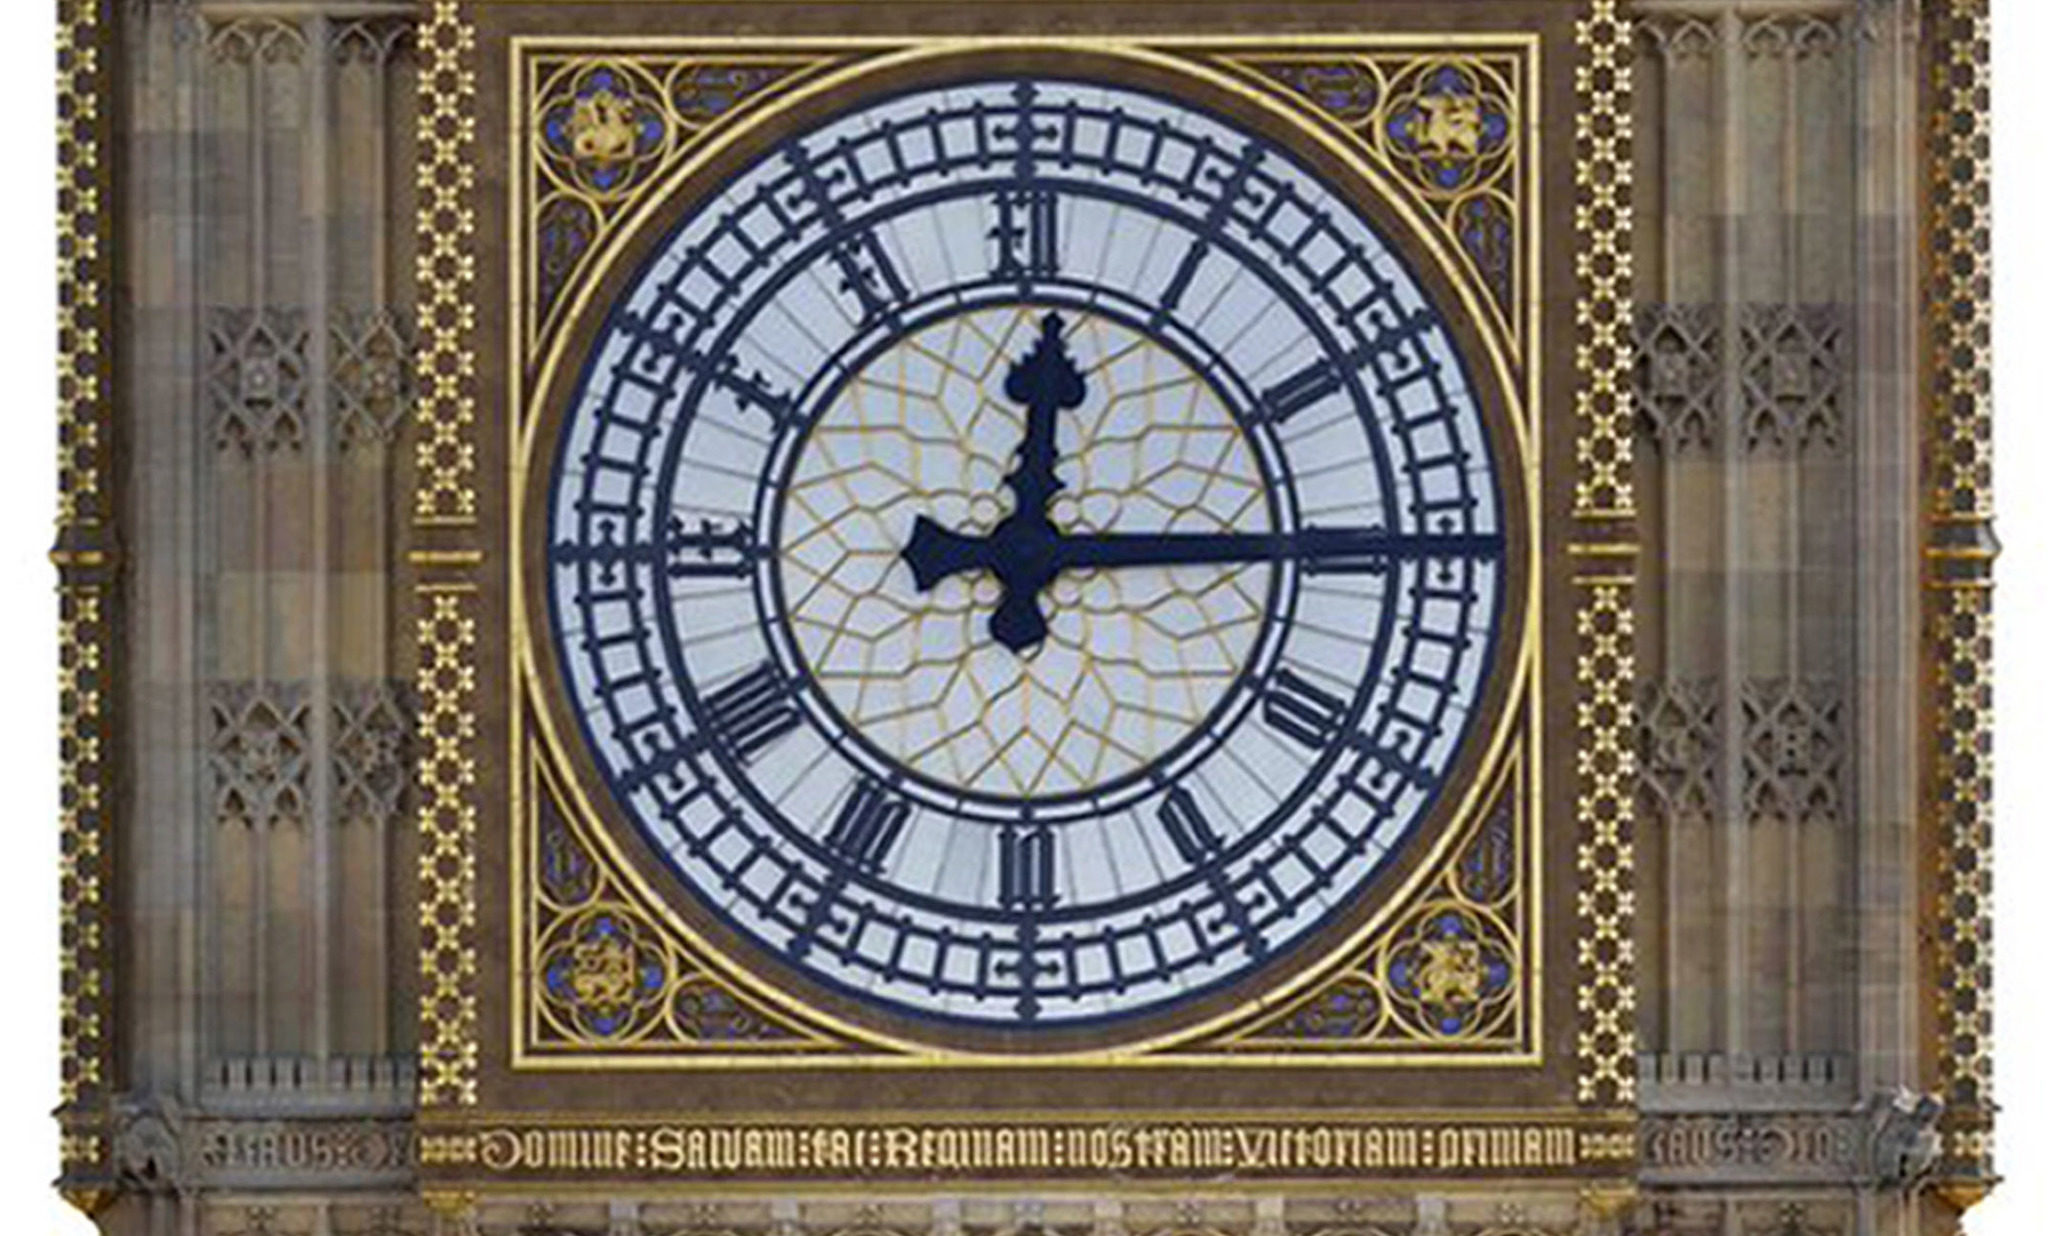 An artist's impression of how Big Ben would look with Cross of St George's shields.